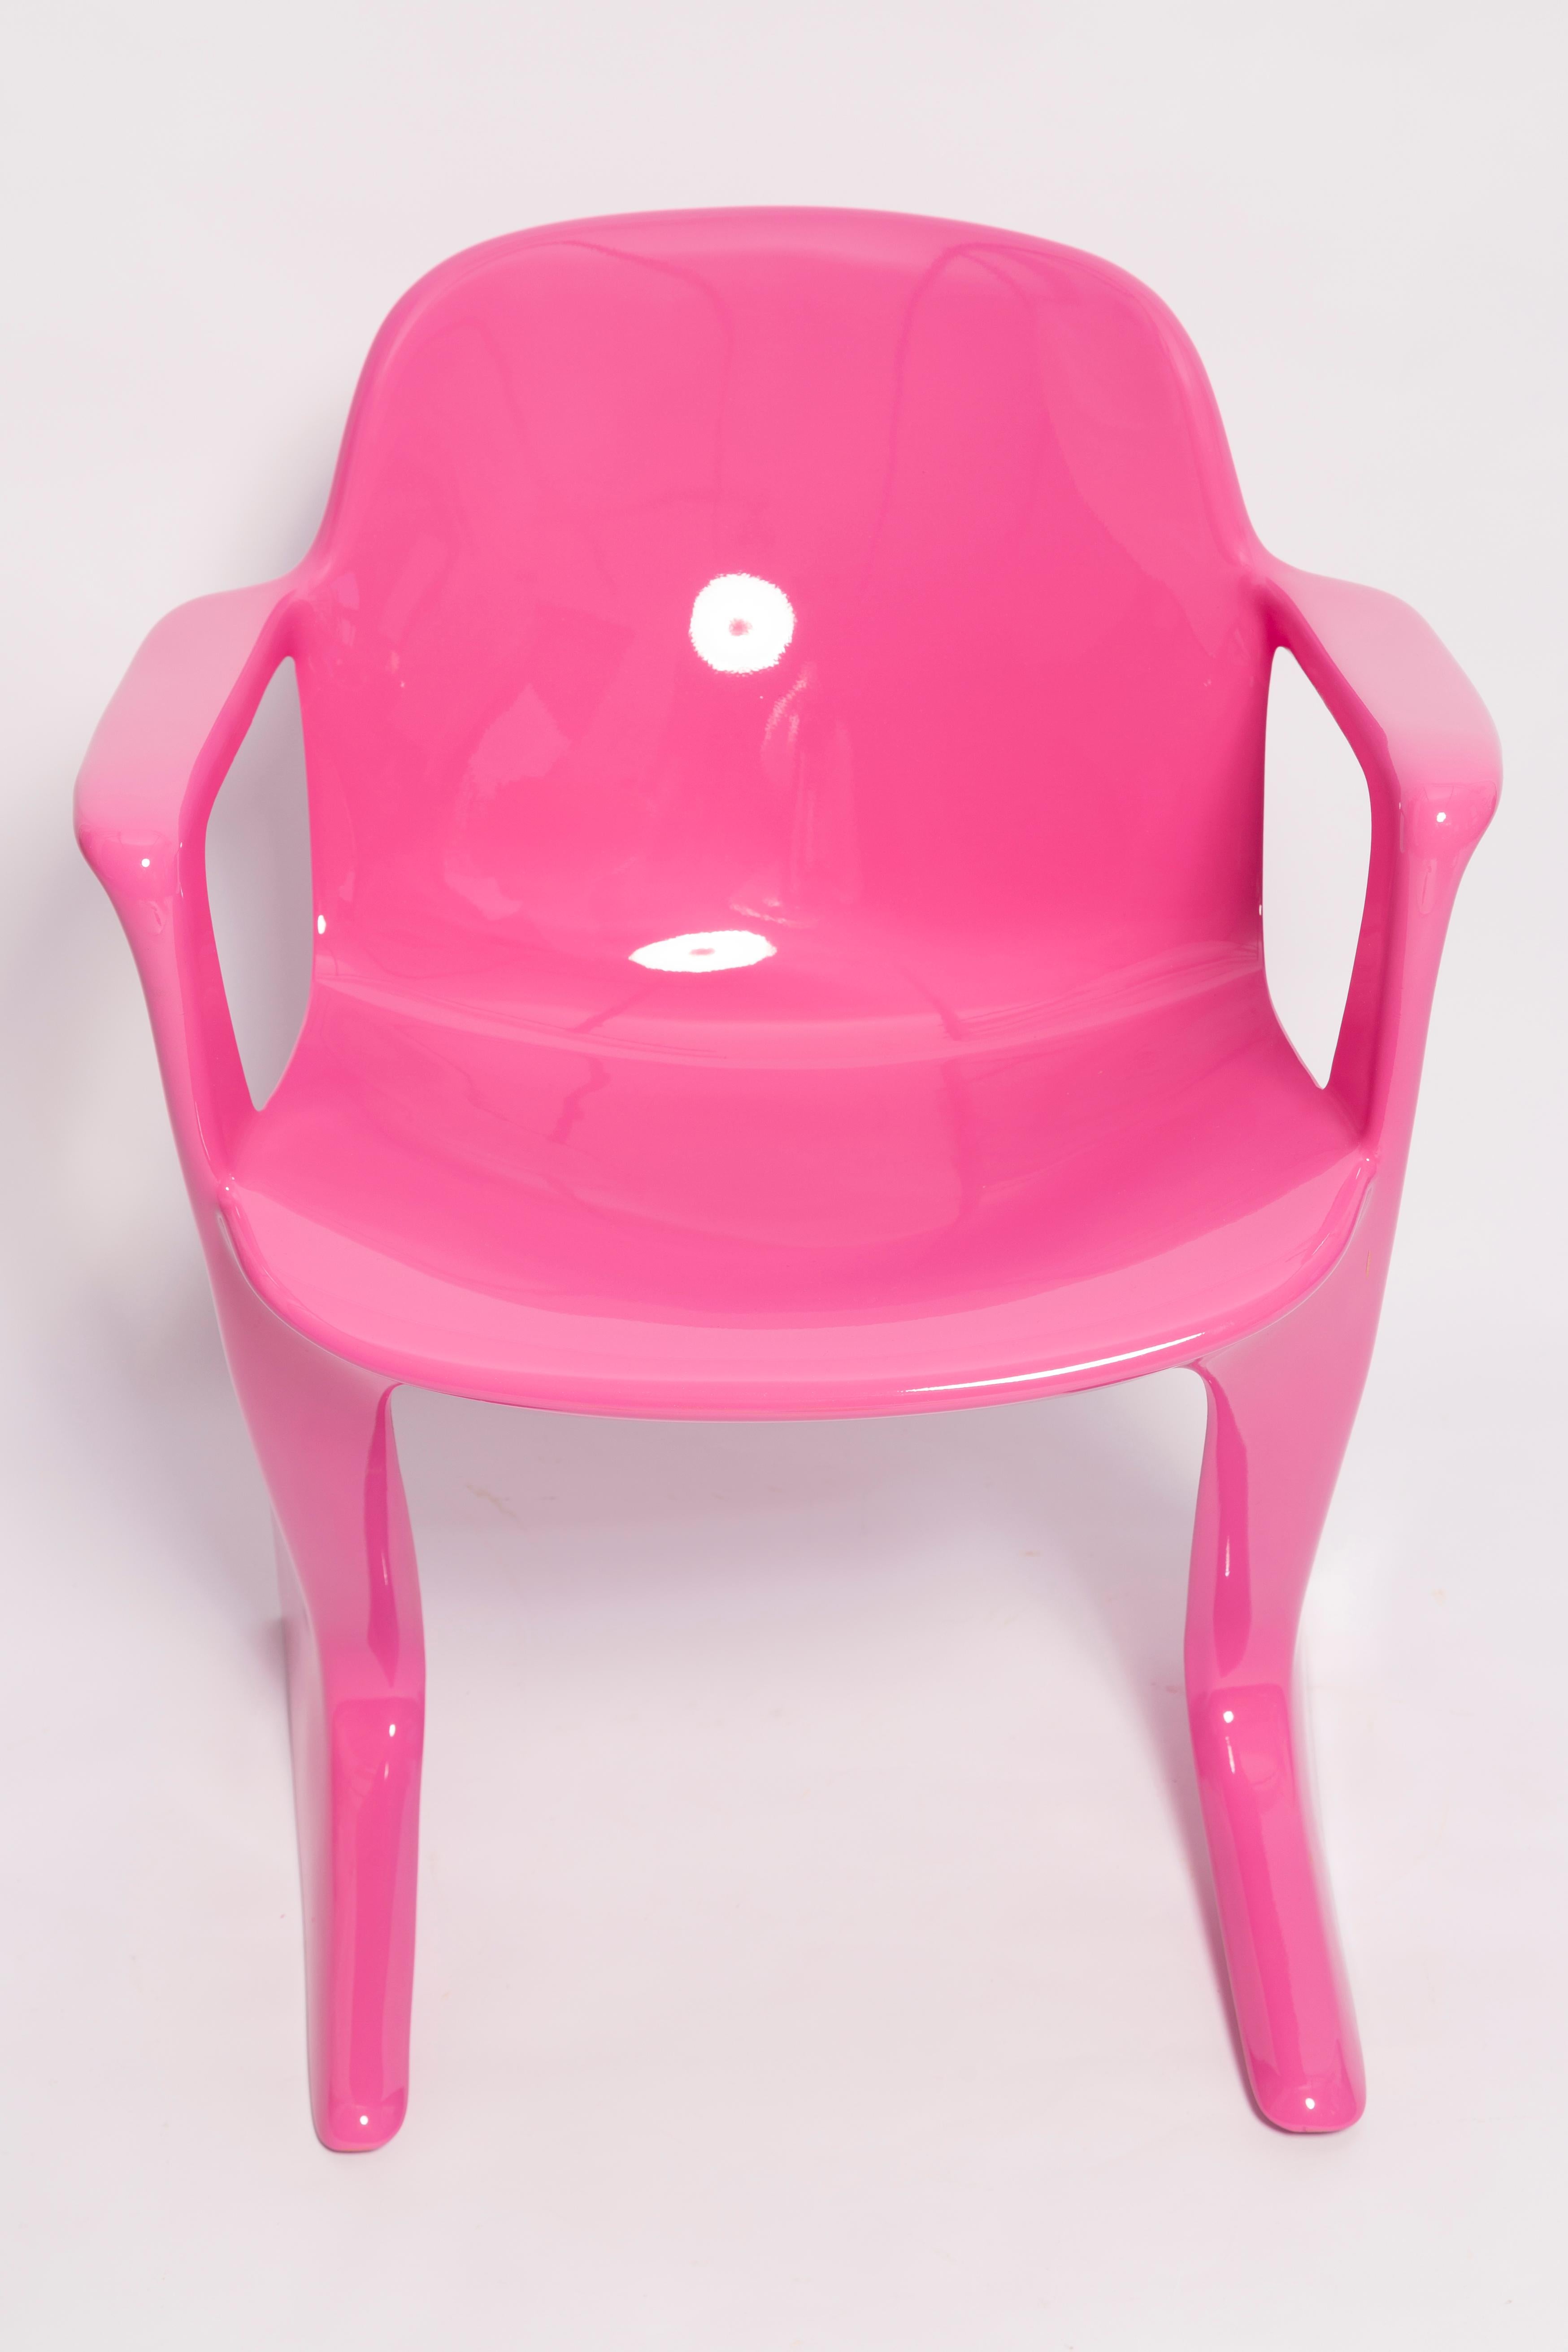 Fiberglass Set of Four Mid Century Pink Kangaroo Chairs, Ernst Moeckl, Germany, 1960s For Sale